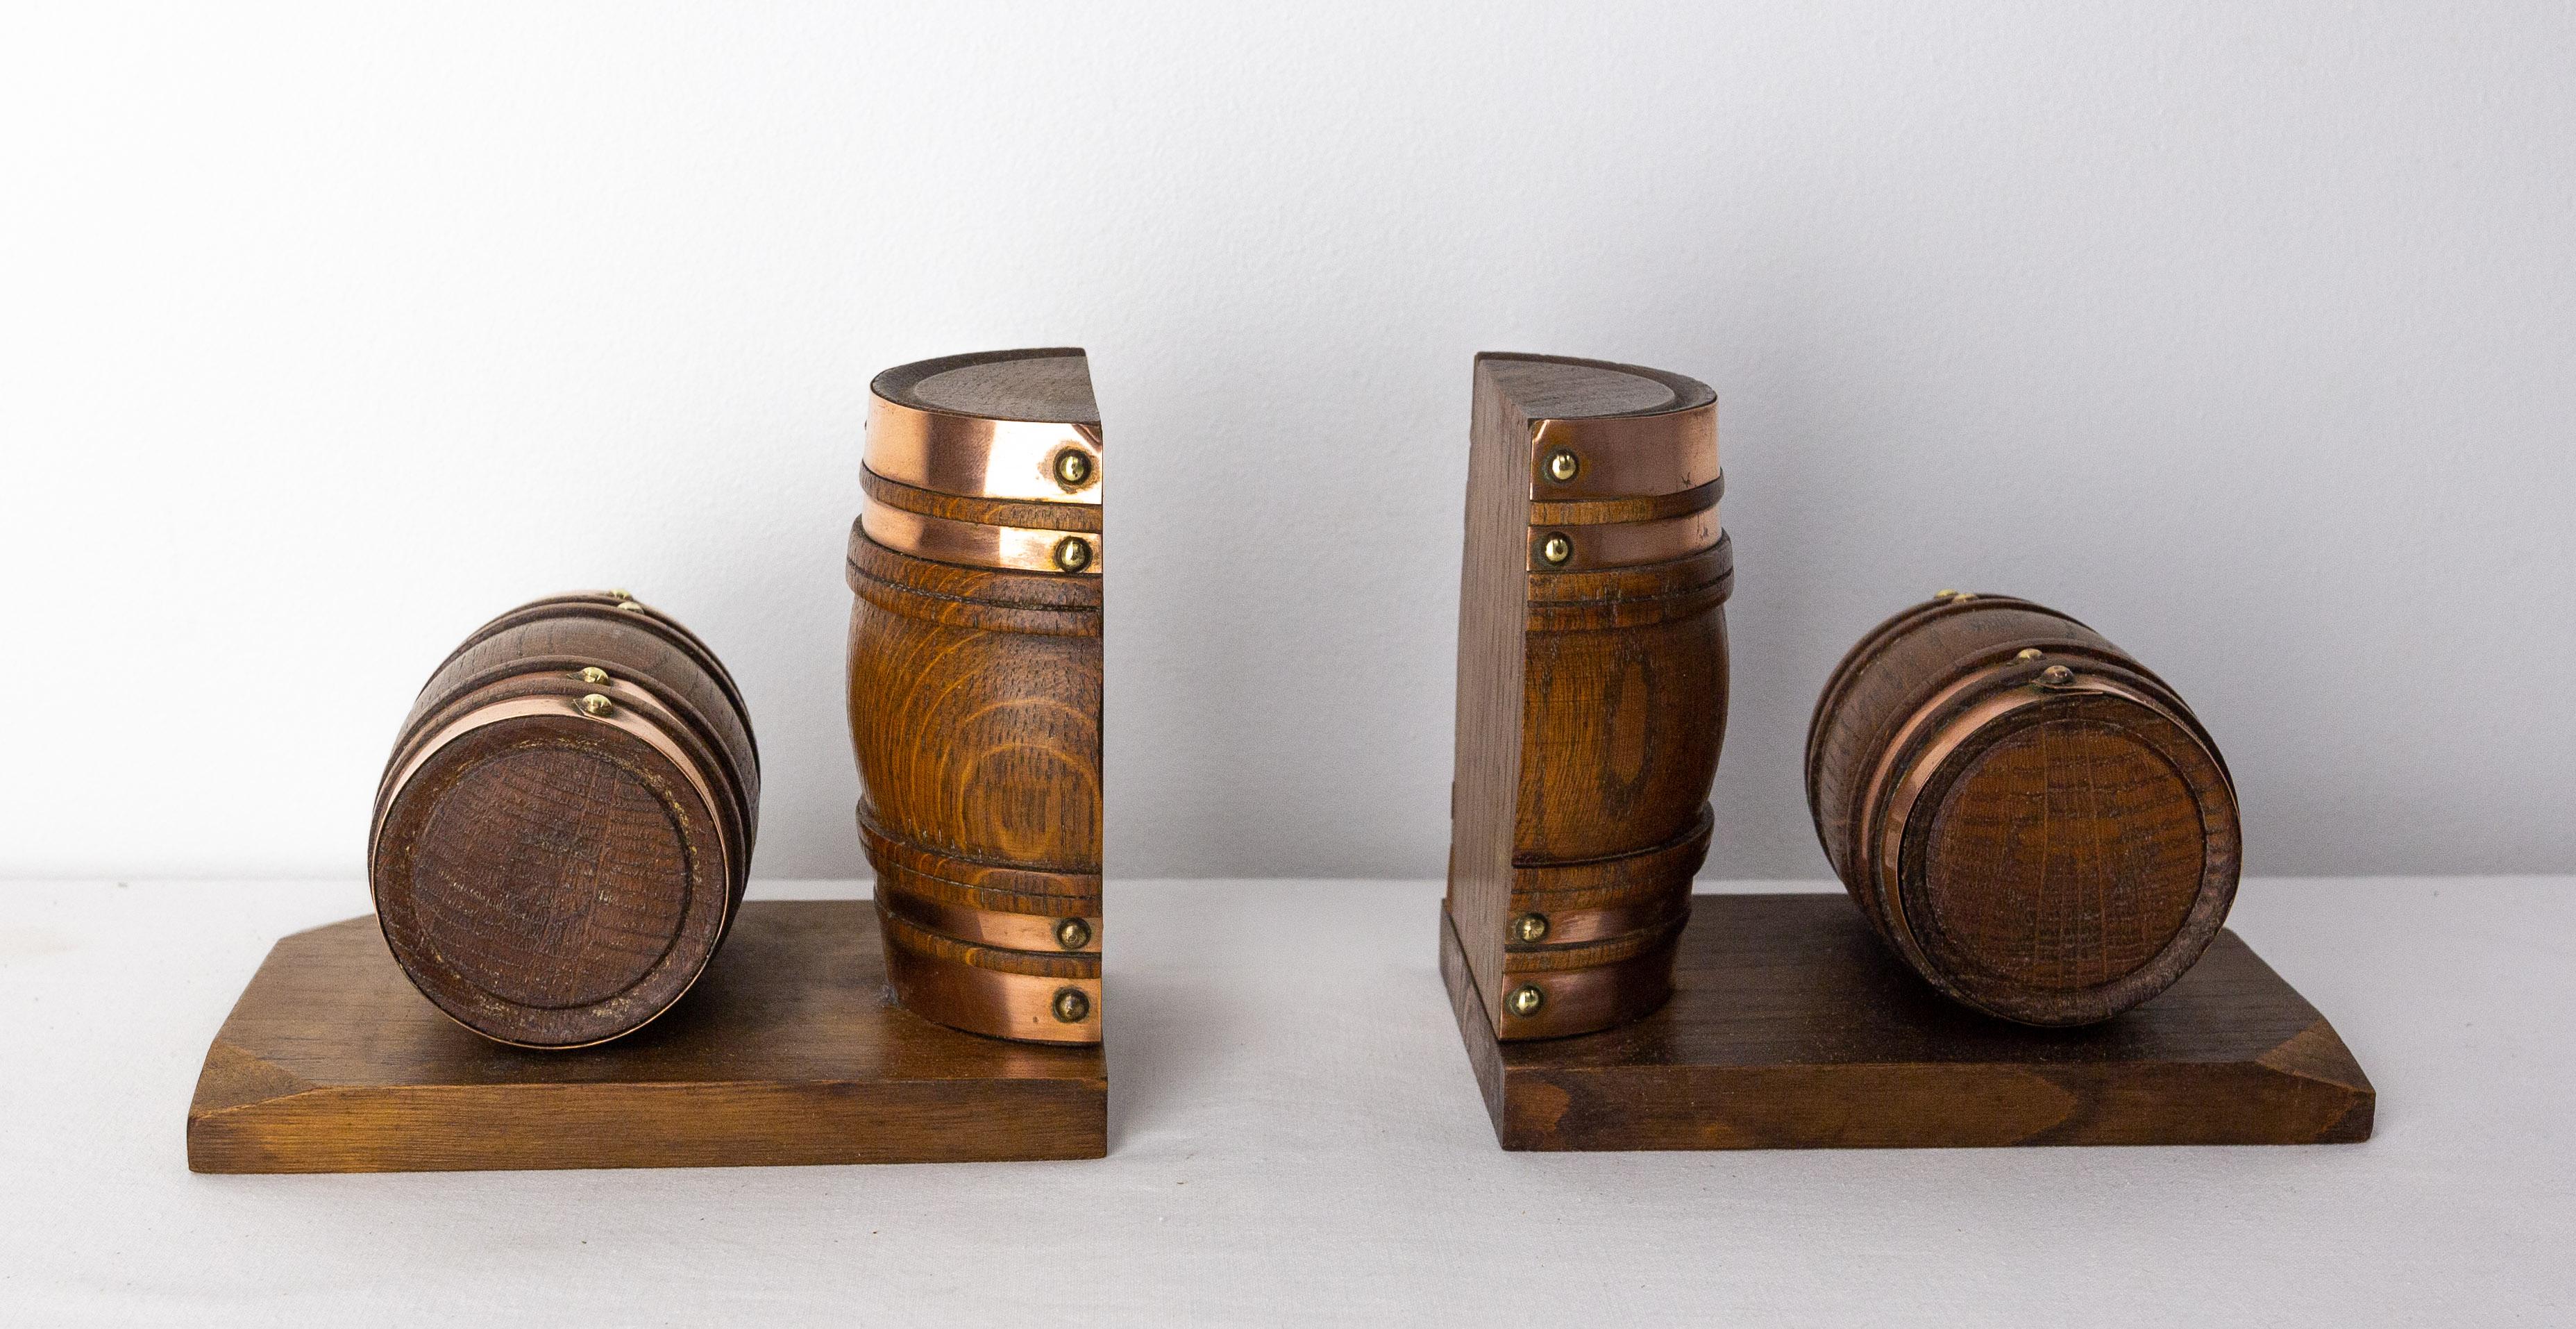 Pair of French bookends
Beech and copper, made in France

Shipping:
L 20 P D 15 H 12 1 kg.